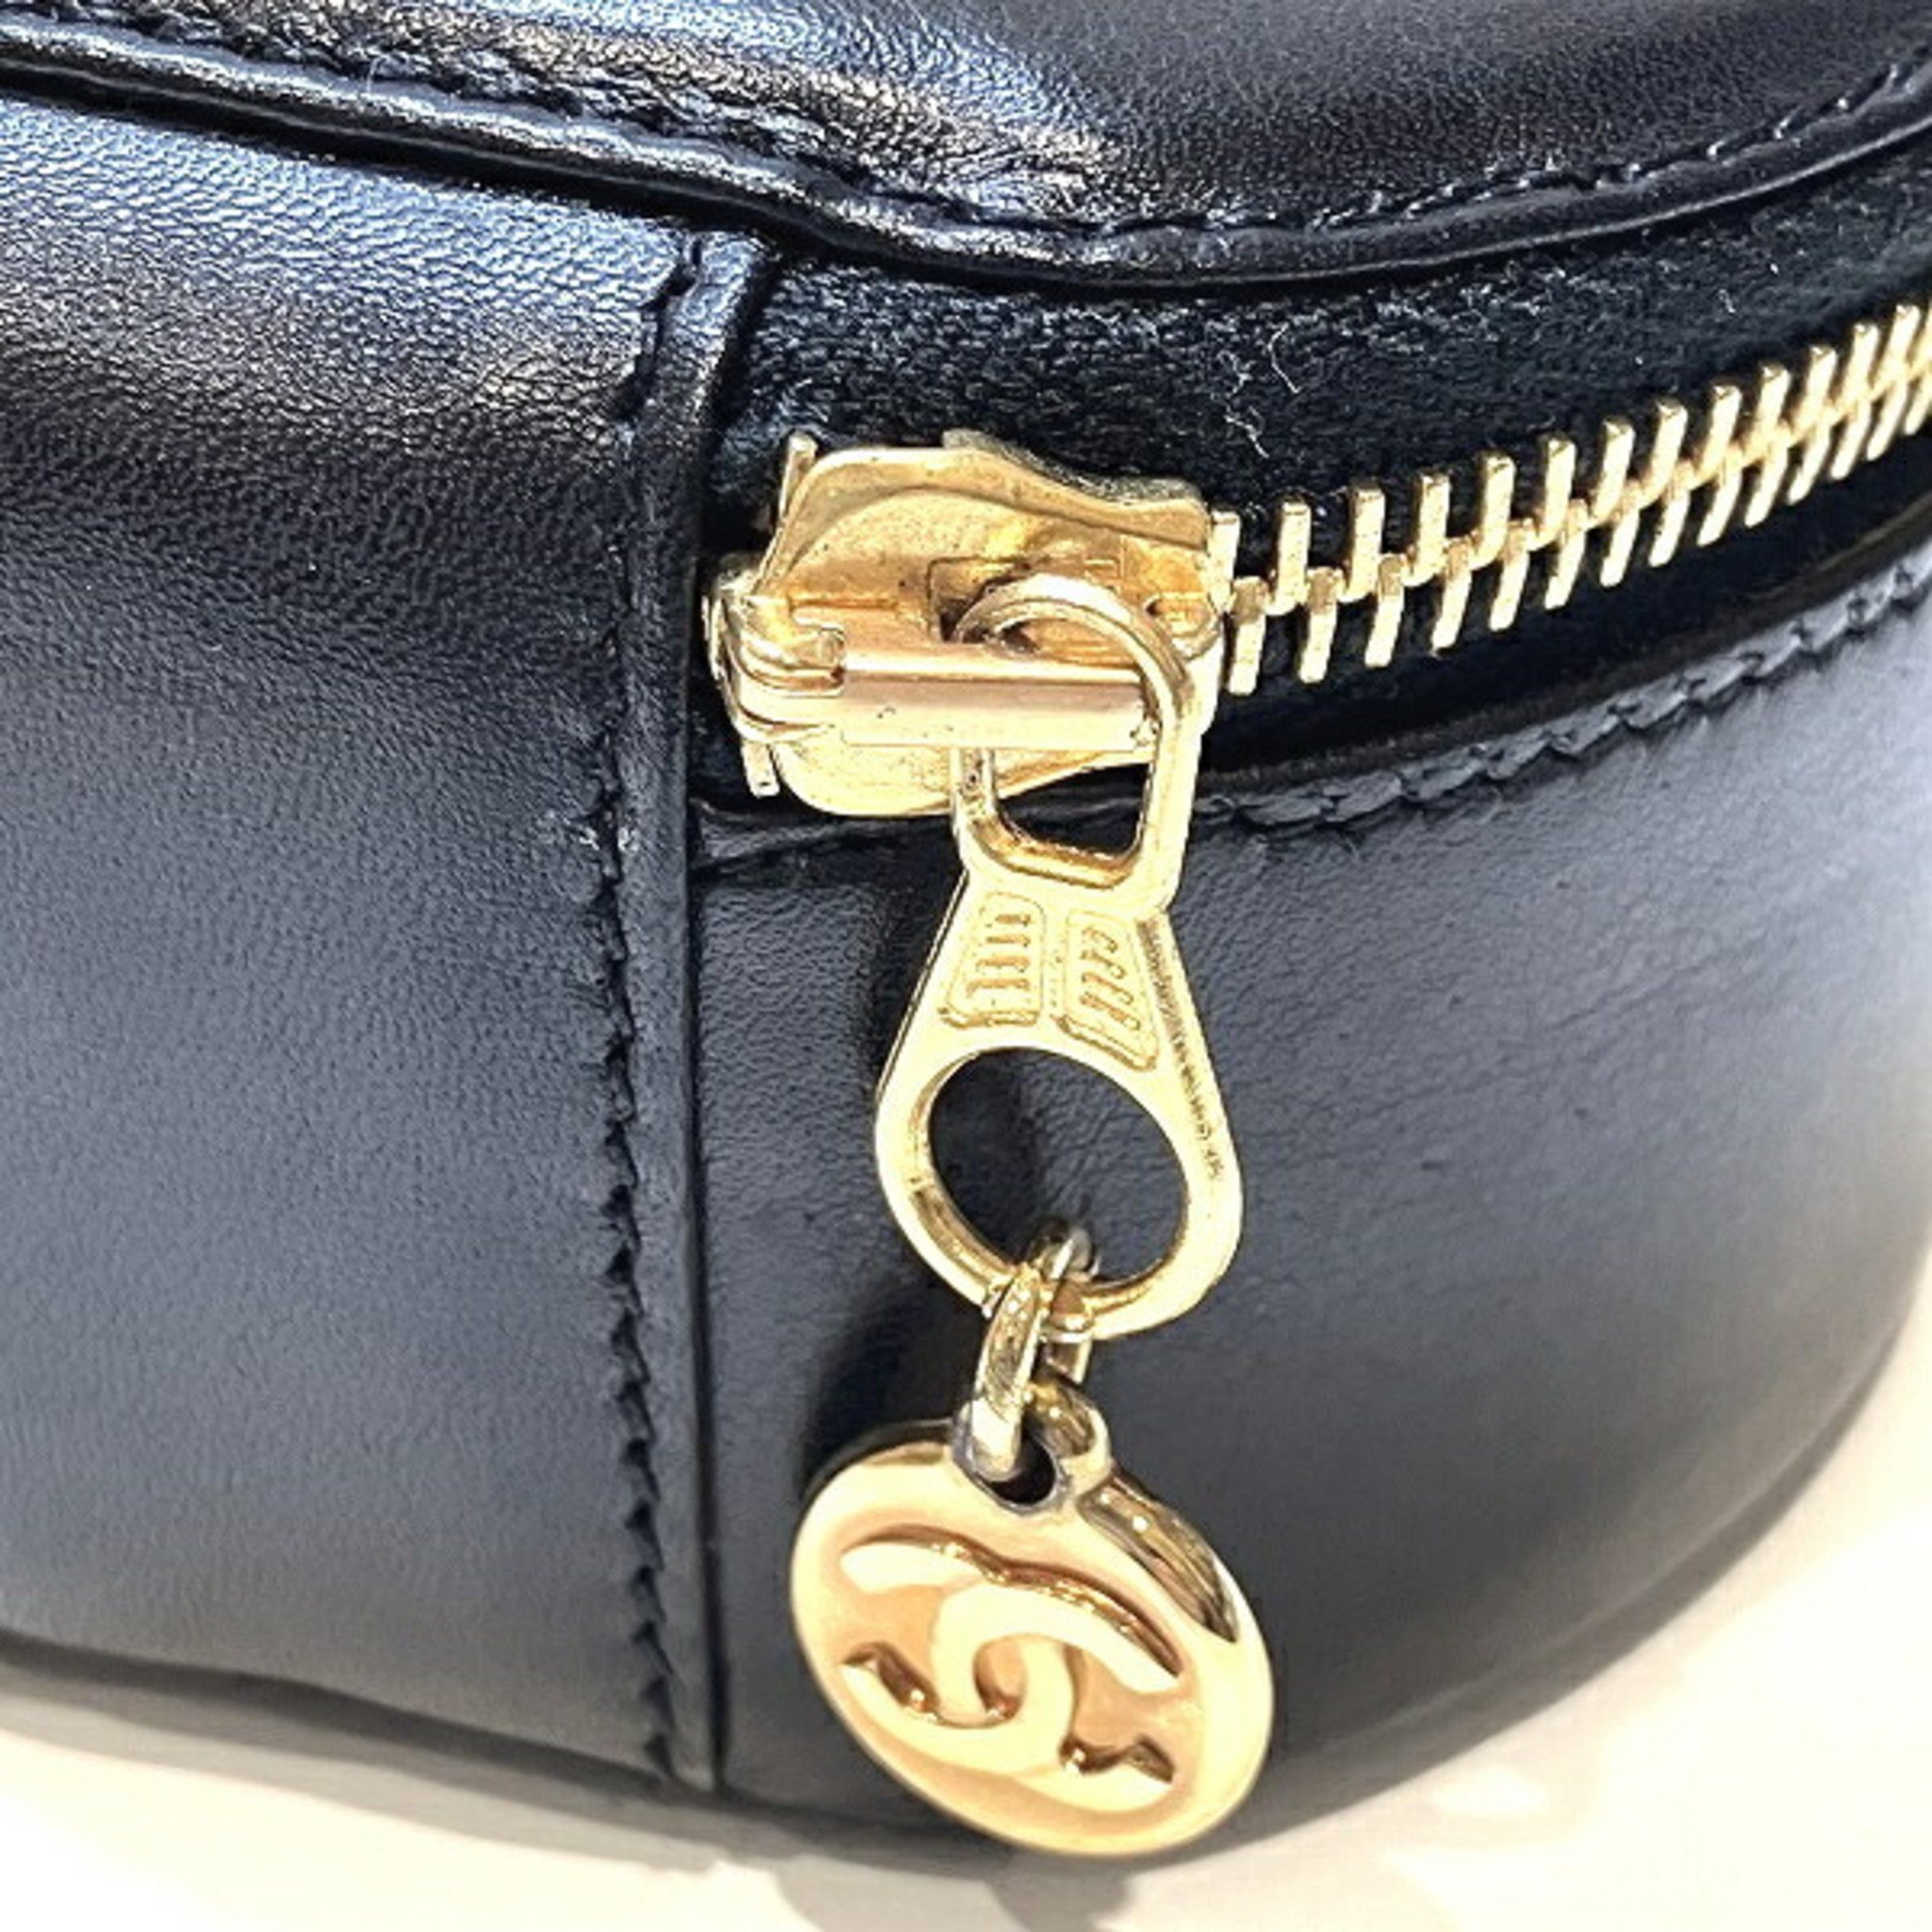 CHANEL Cocomark Brand Accessories Jewelry Pouch Women's Bag